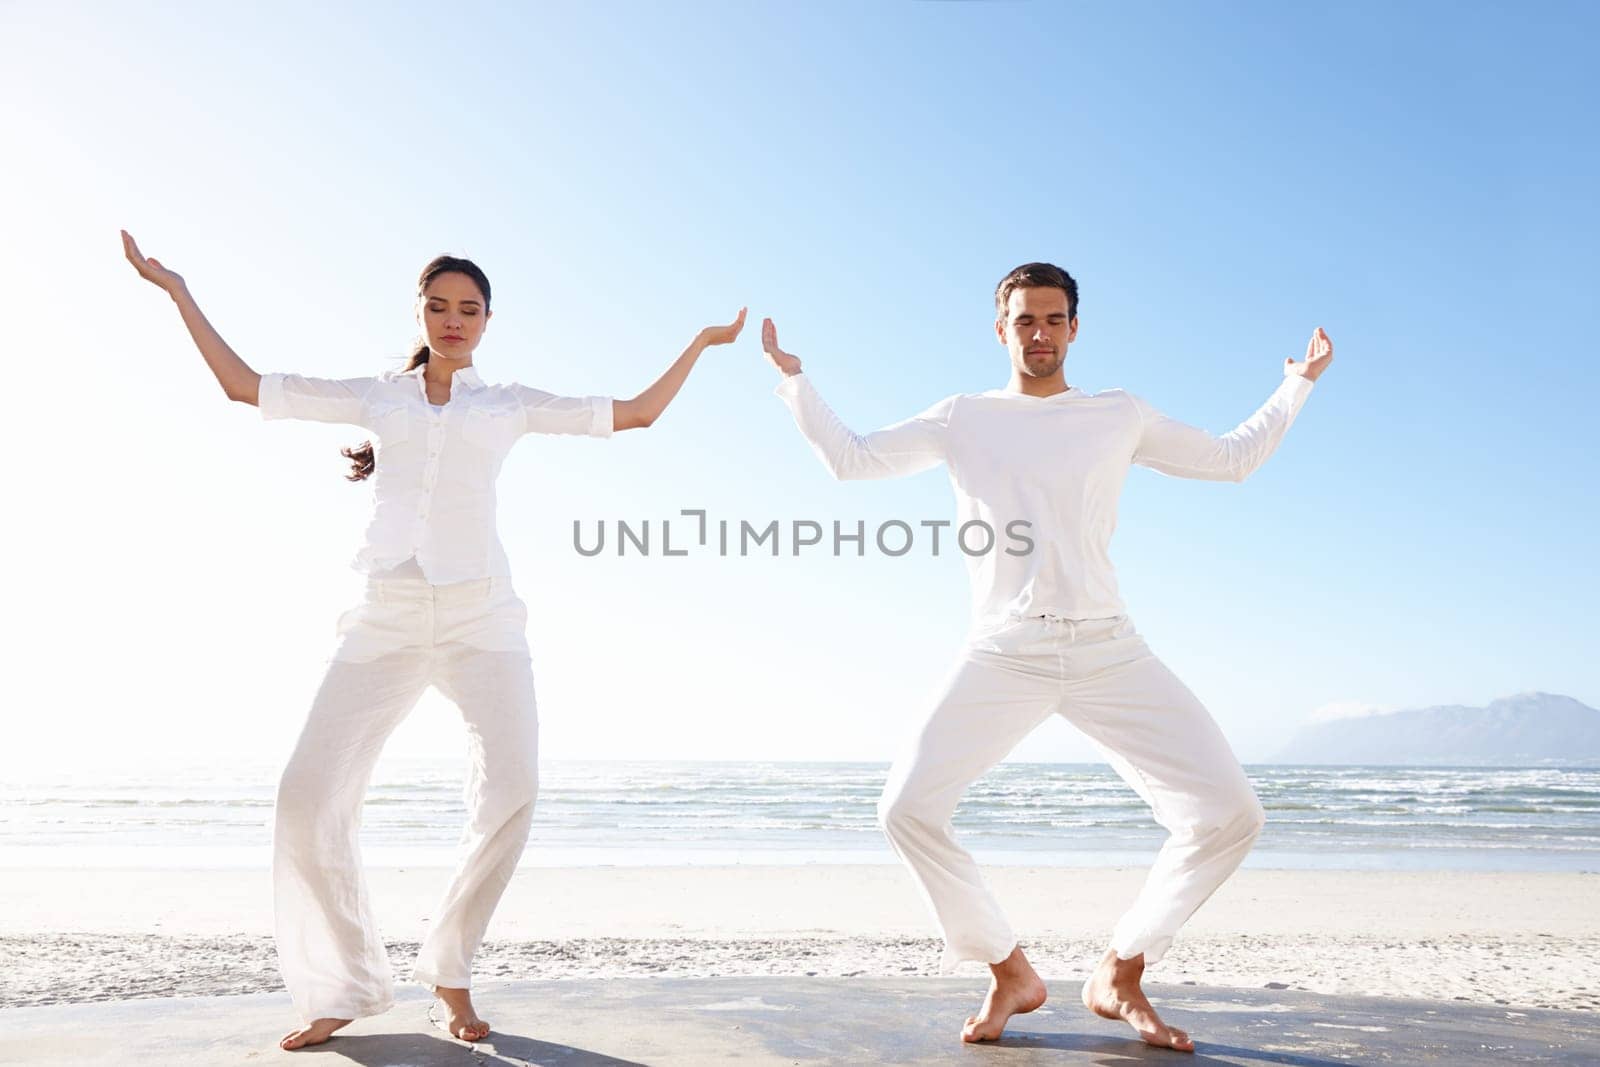 Couple, yoga or beach in mindfulness, practice of meditation as health, fitness or wellness in peace. Man, woman or eyes closed to focus as spiritual, zen or performance for balance and gratitude.